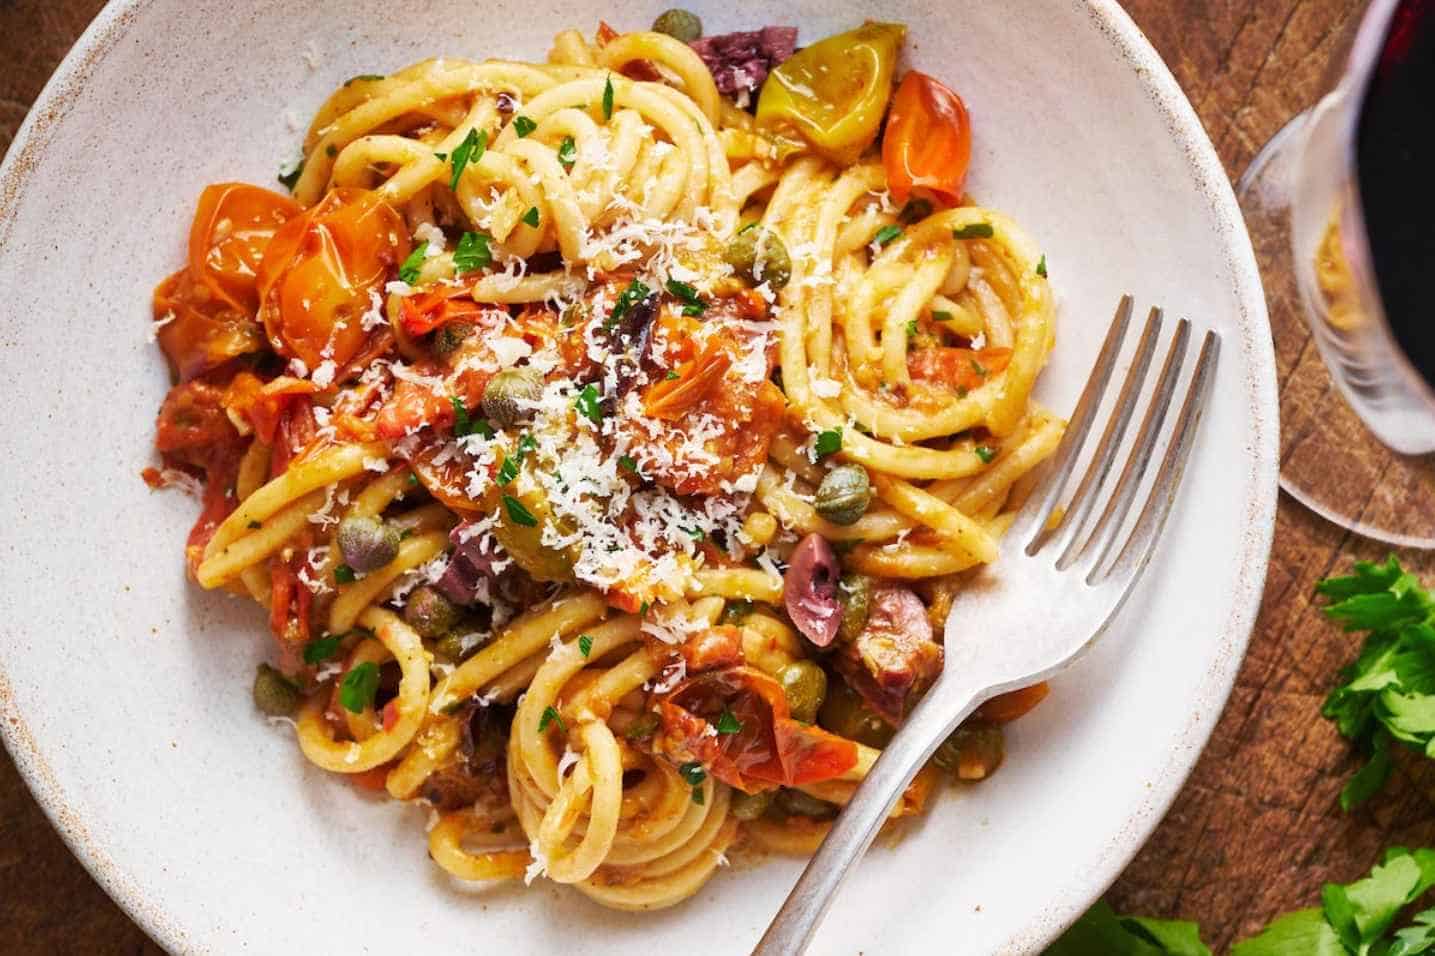 What-Wine-Goes-With-Puttanesca-based-Pasta